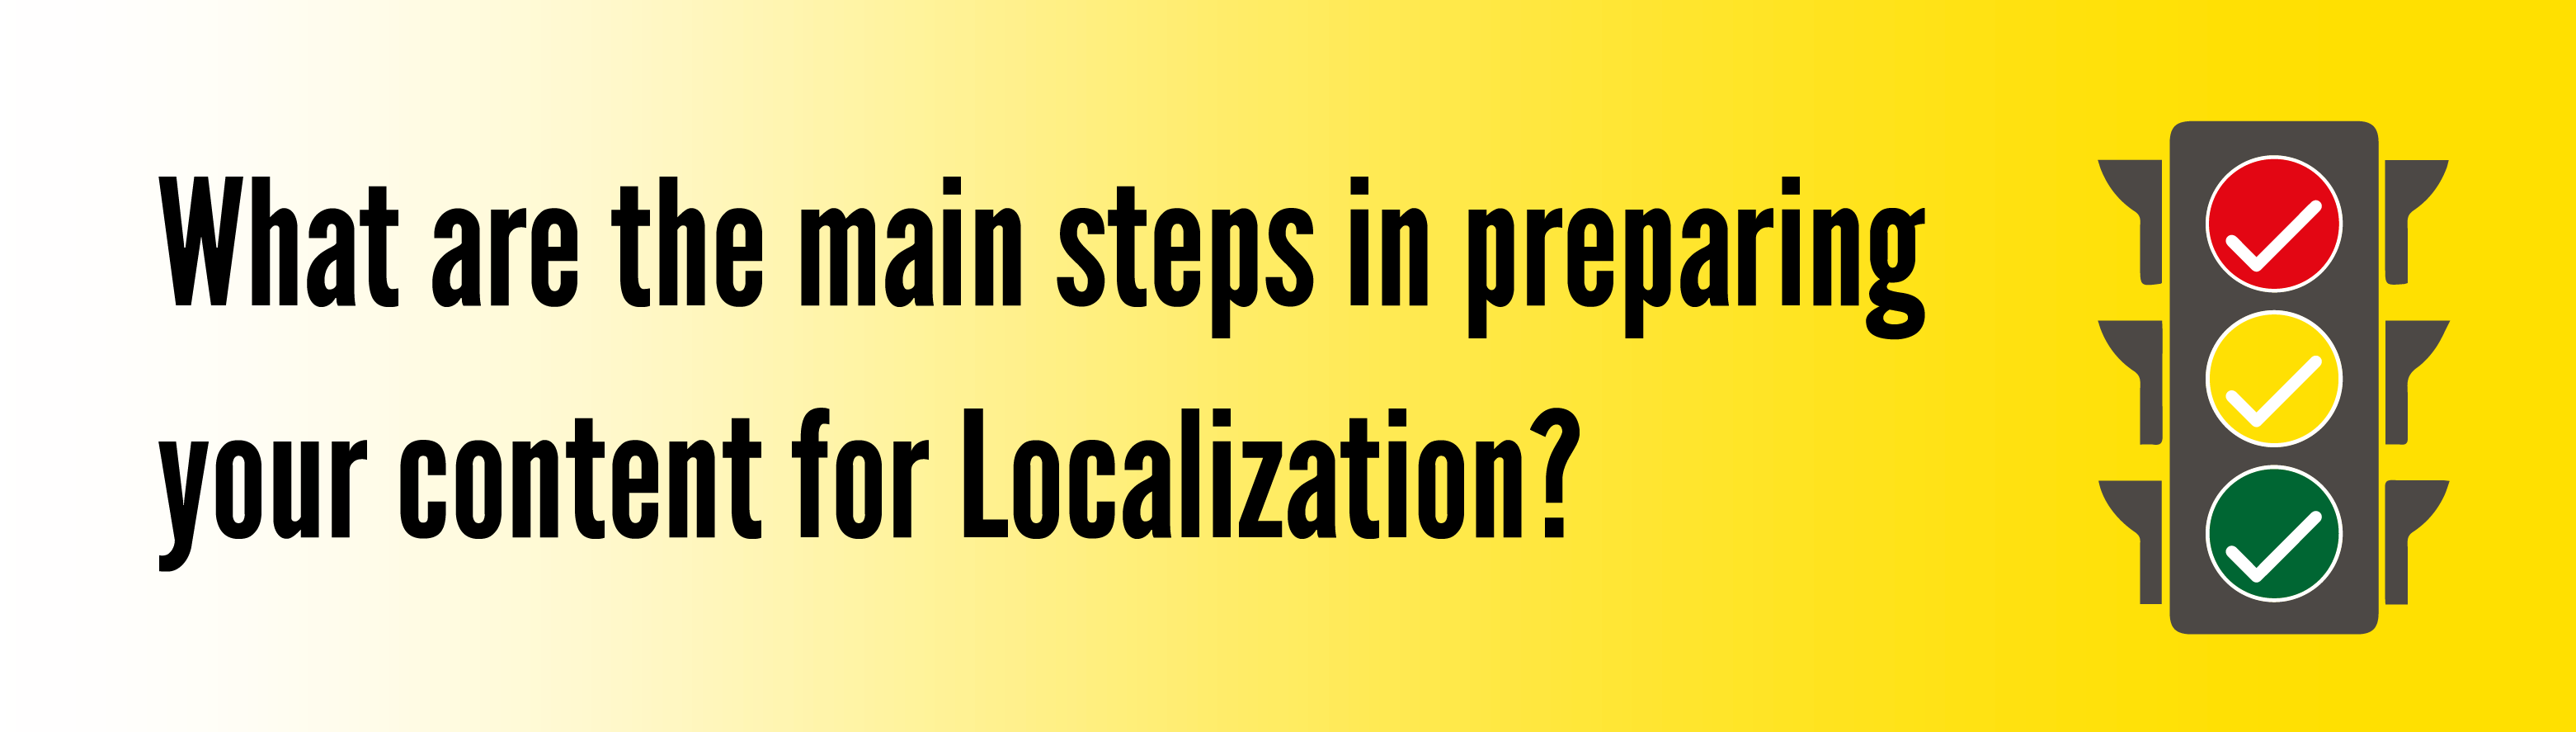 What are the main steps in preparing your content for Localization